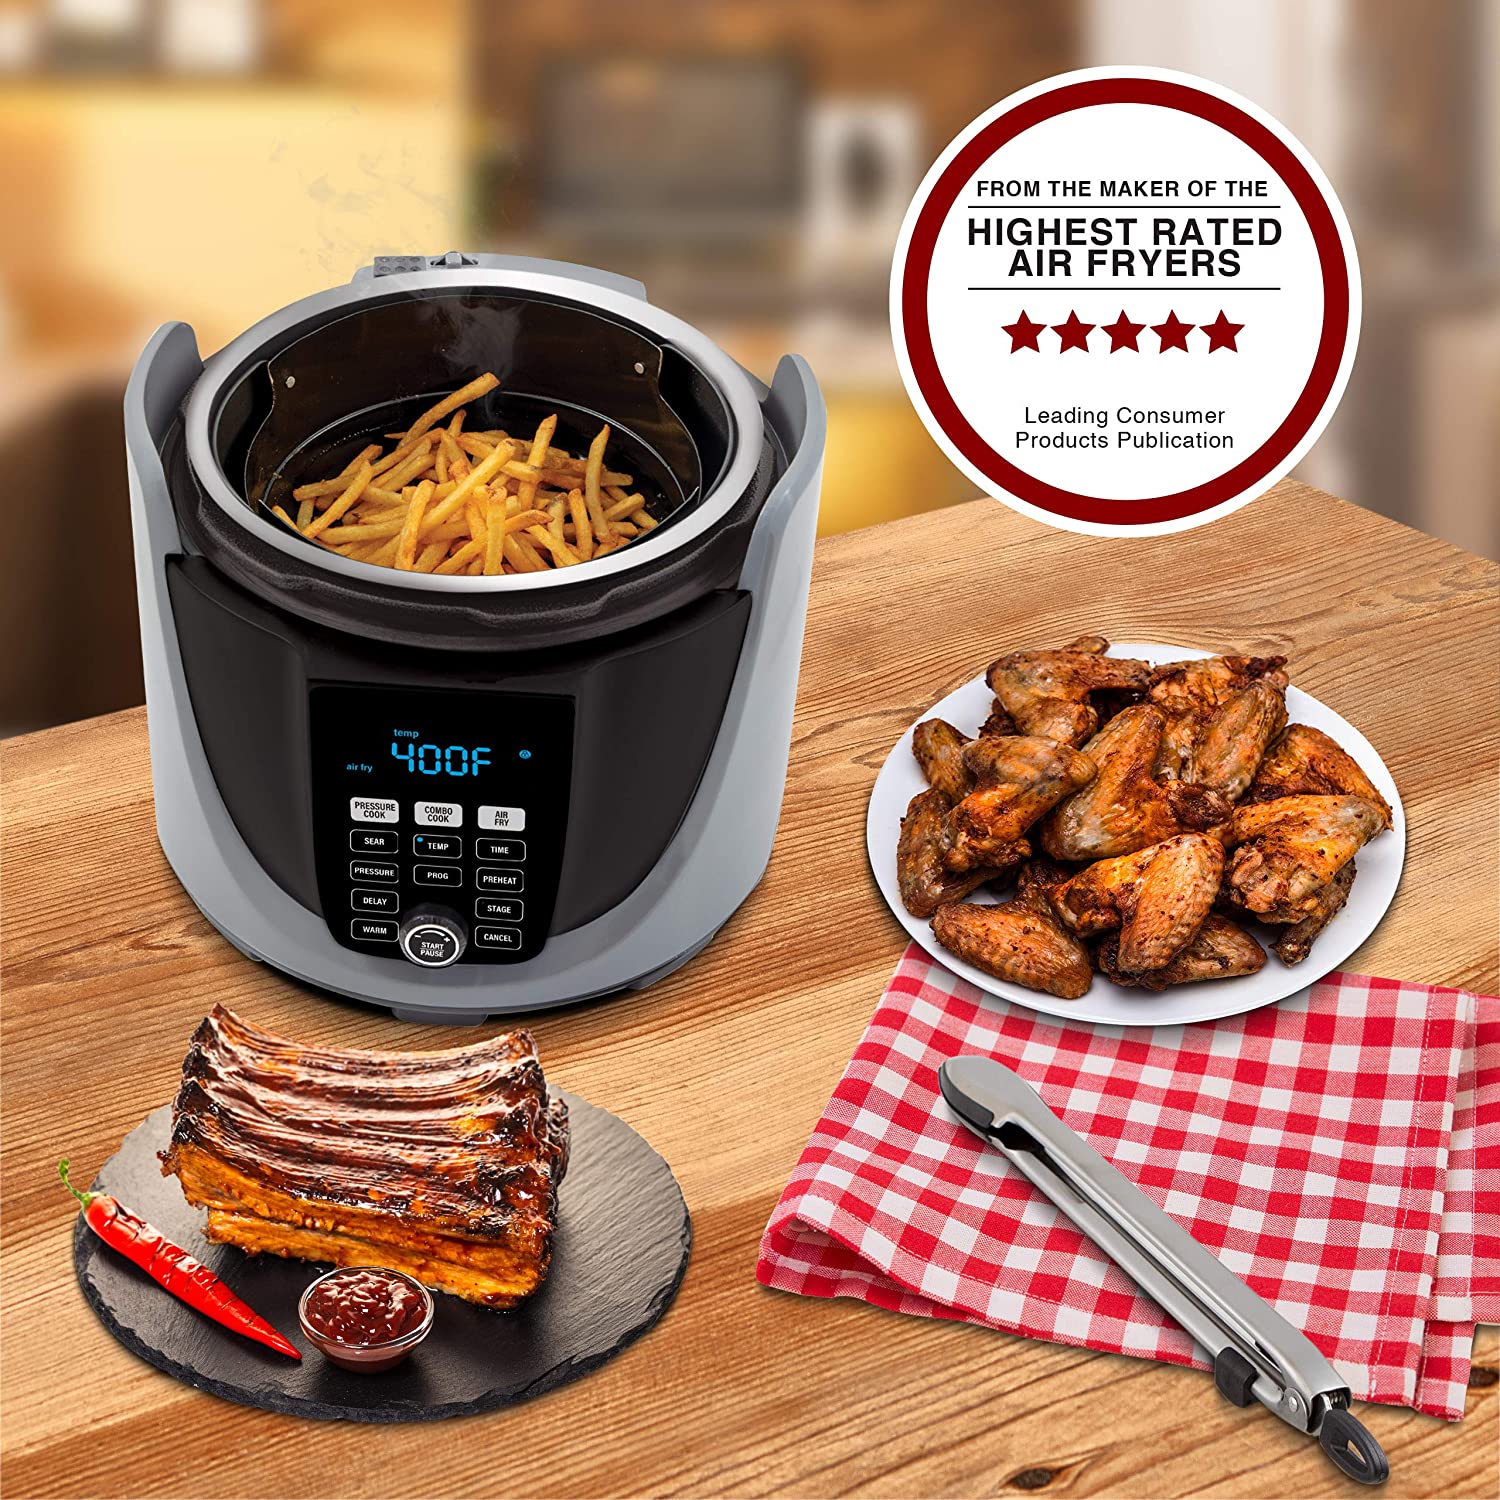 NUWAVE DUET Pressure Air Fryer, Combo Cook Technology, Removable